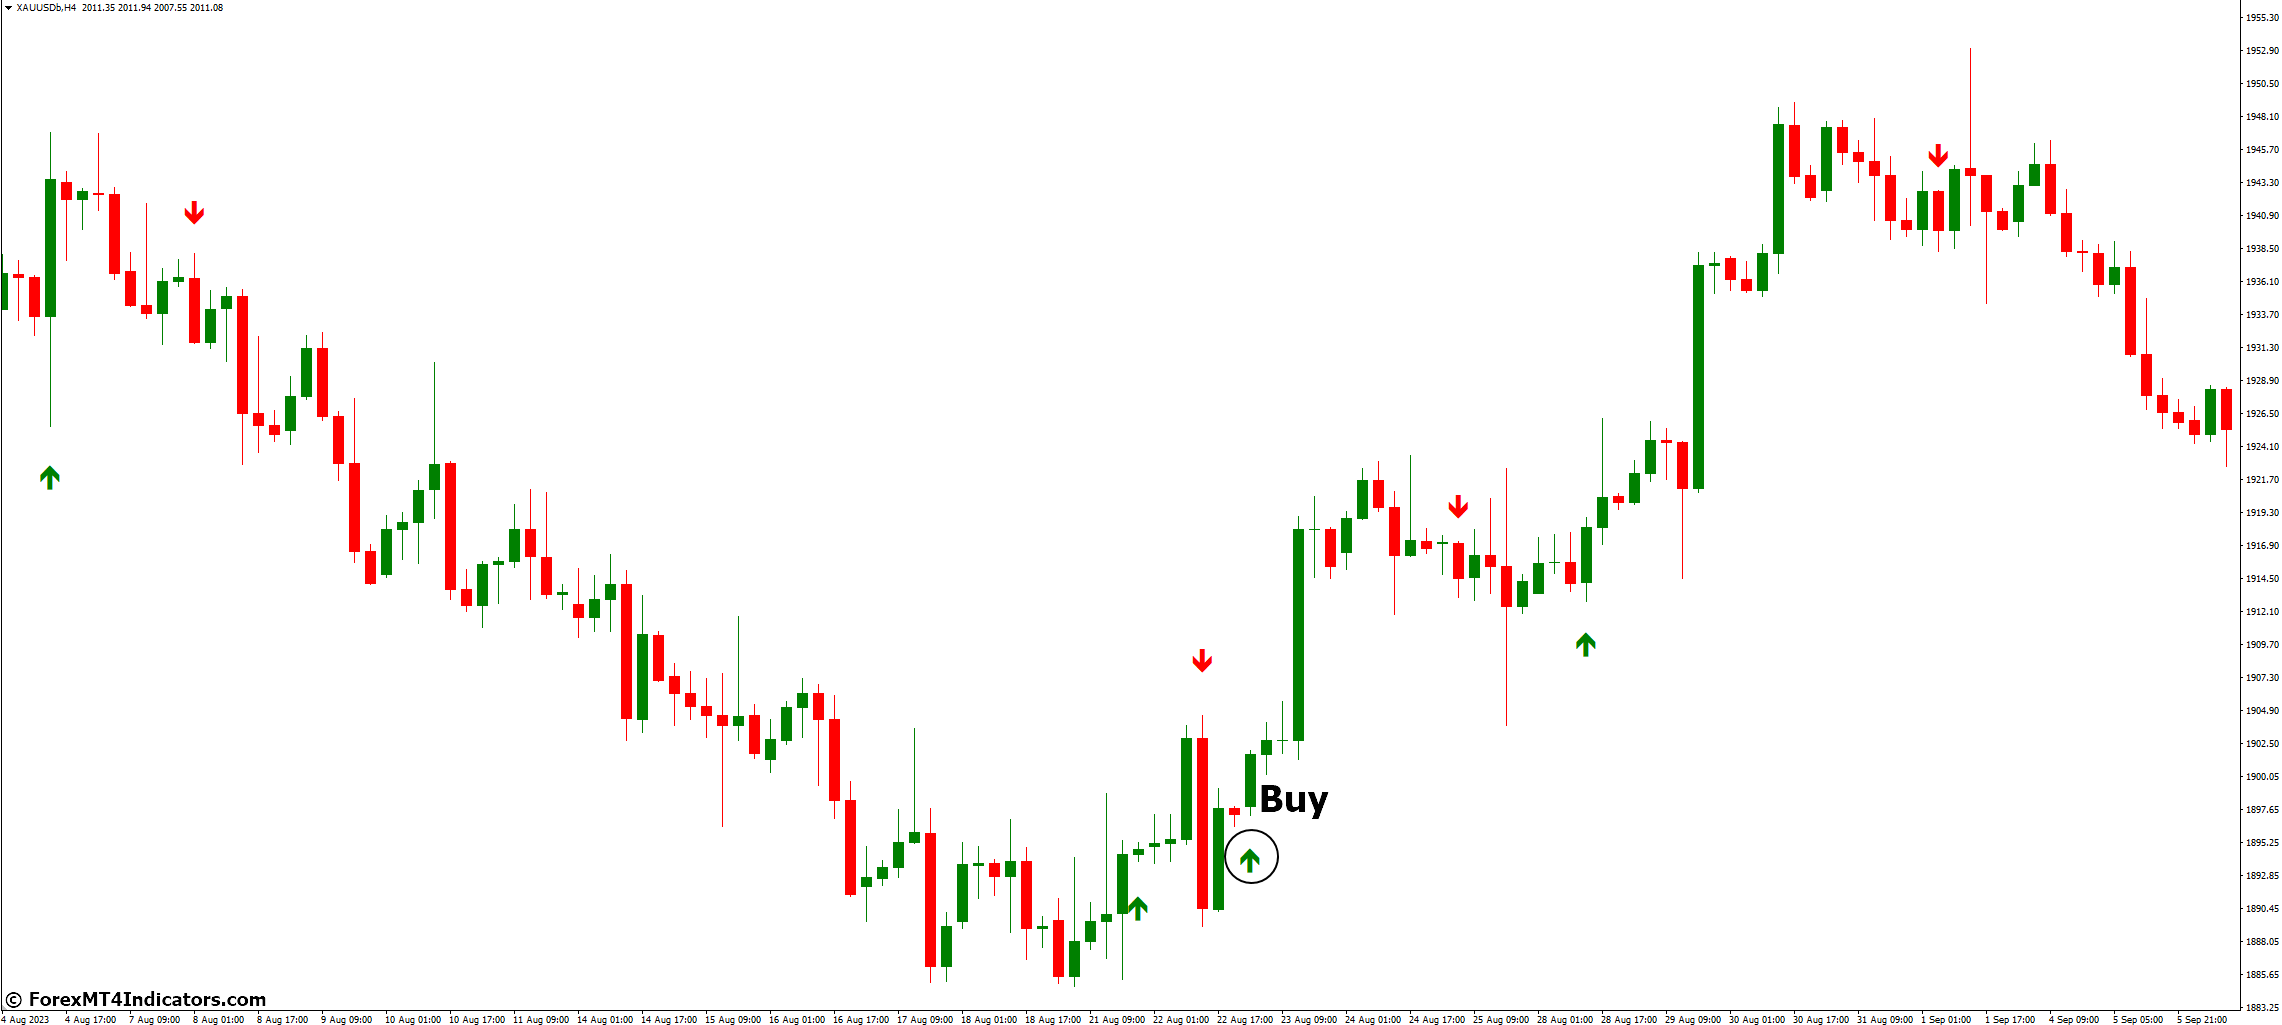 How to Trade with Trend Signal MT4 Indicator - Buy Entry